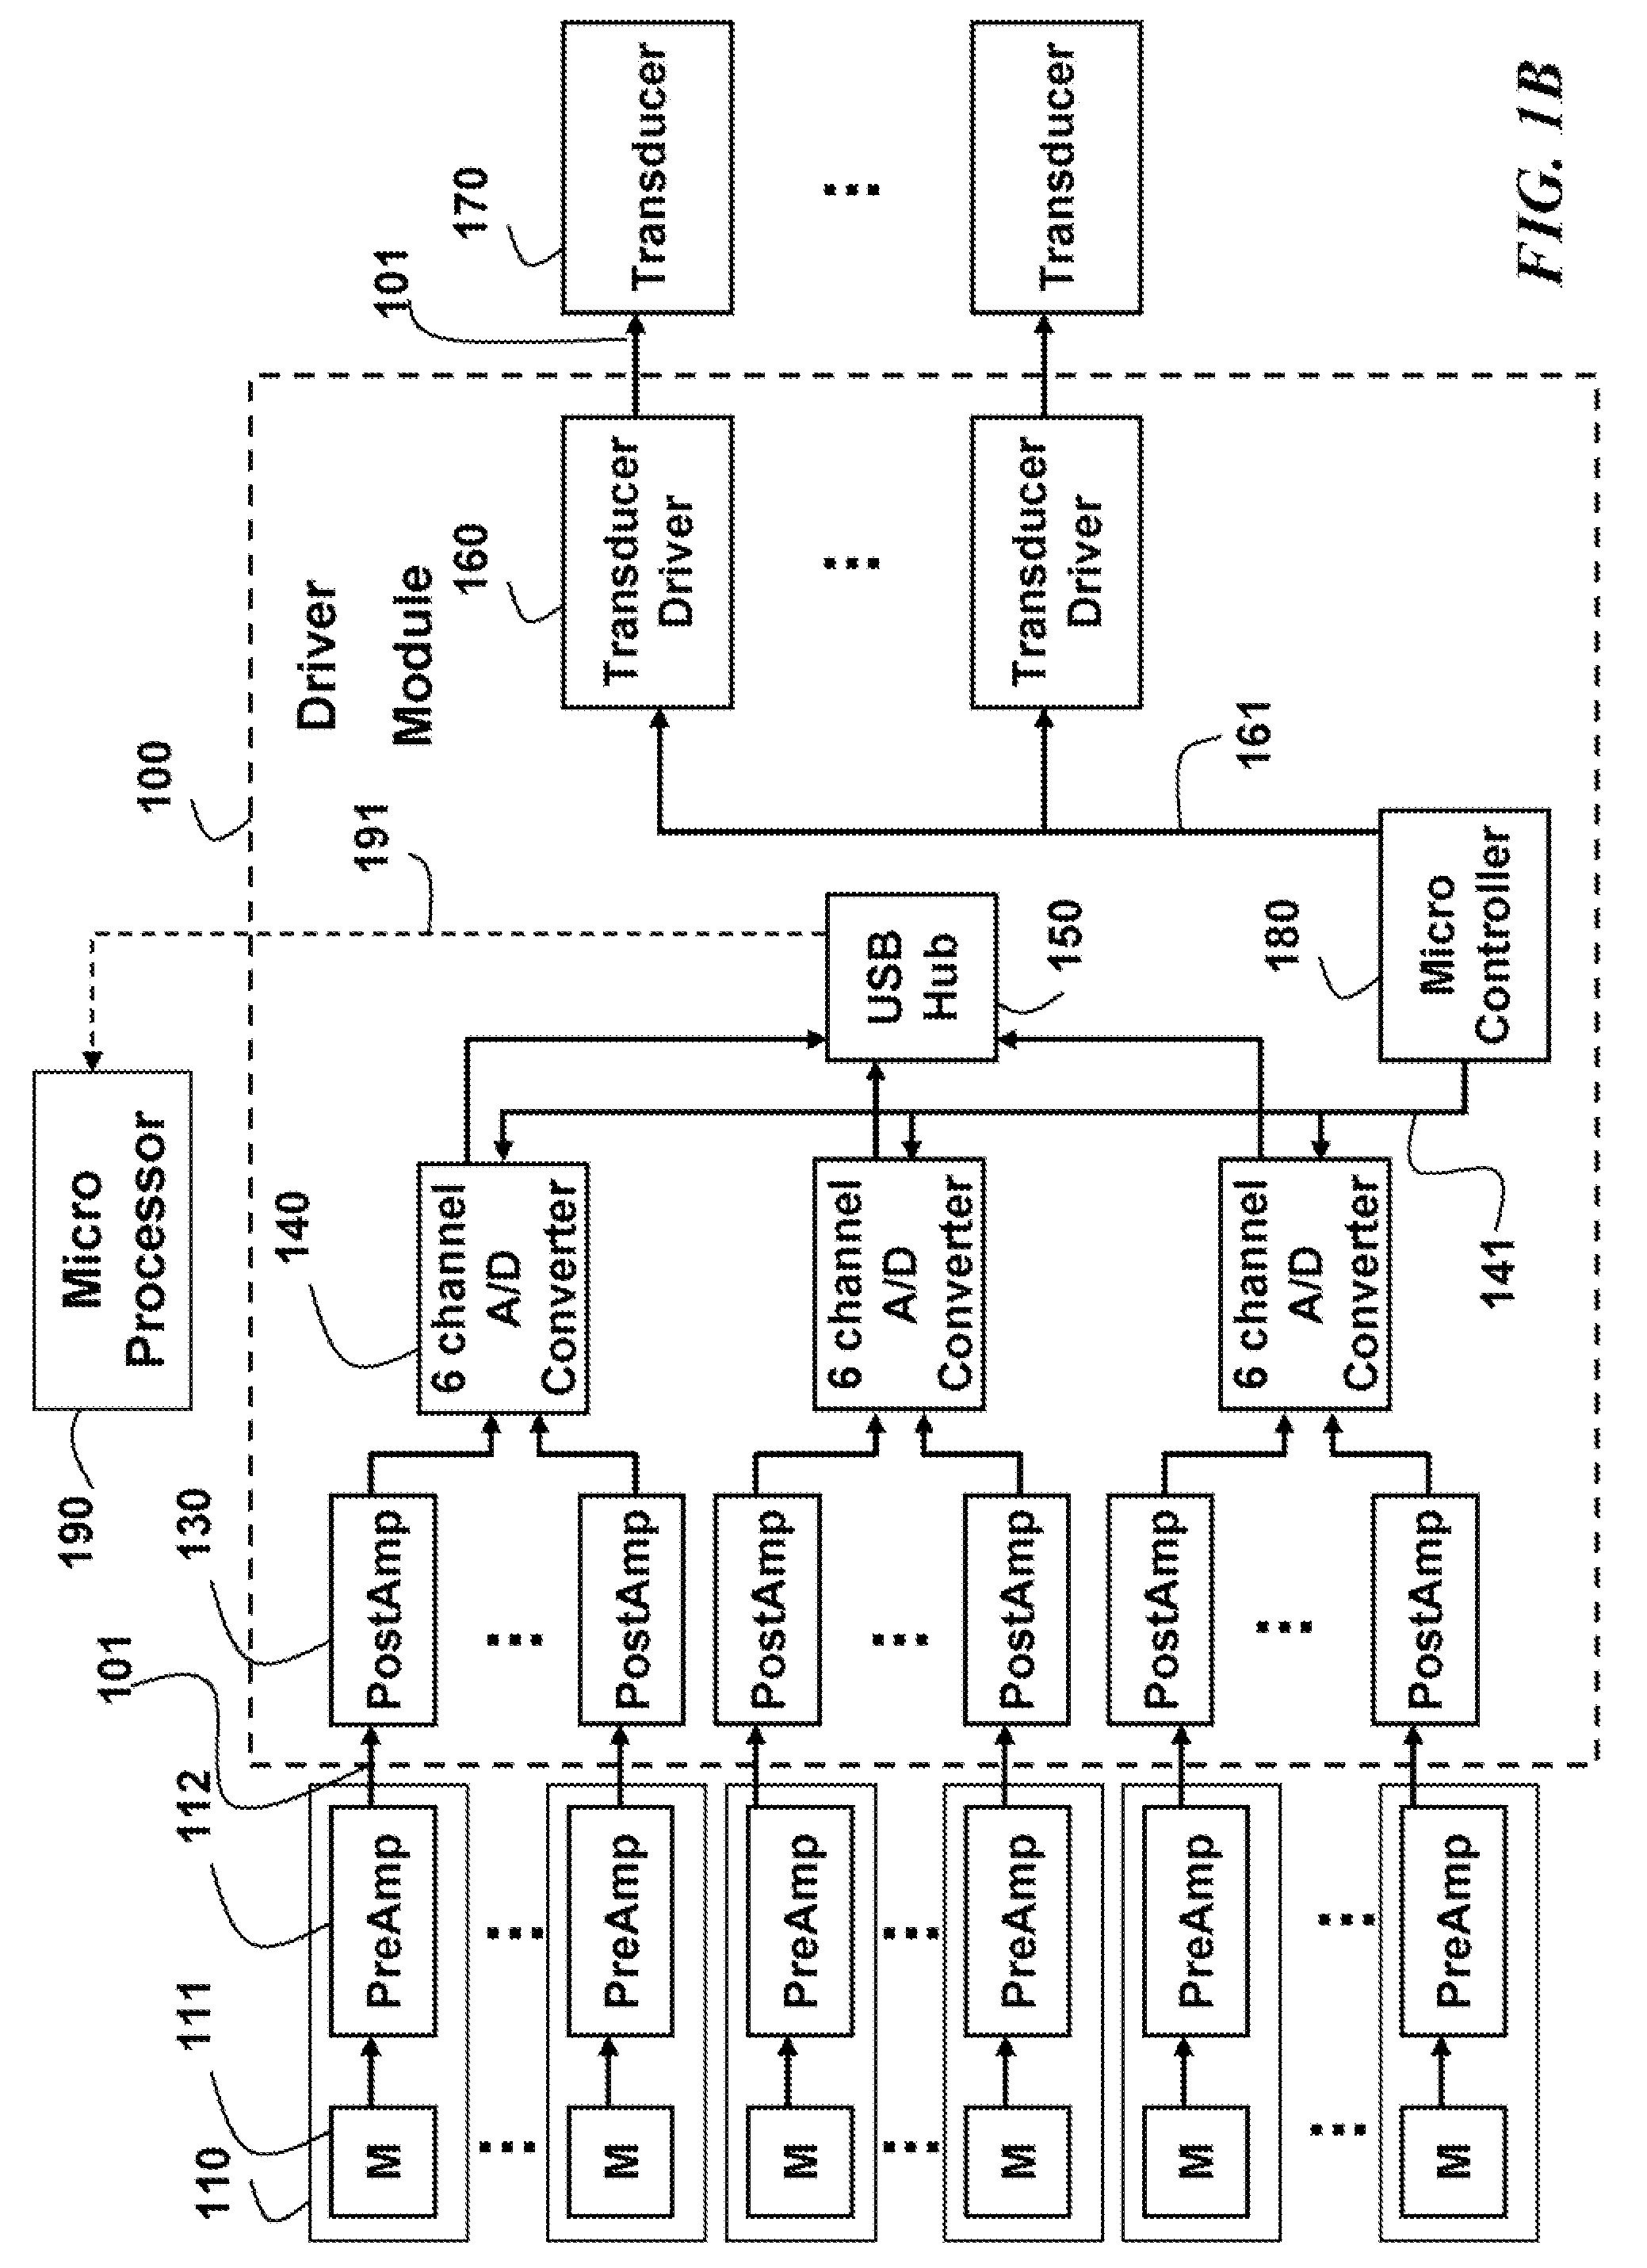 System and Method for Motion Capture in Natural Environments